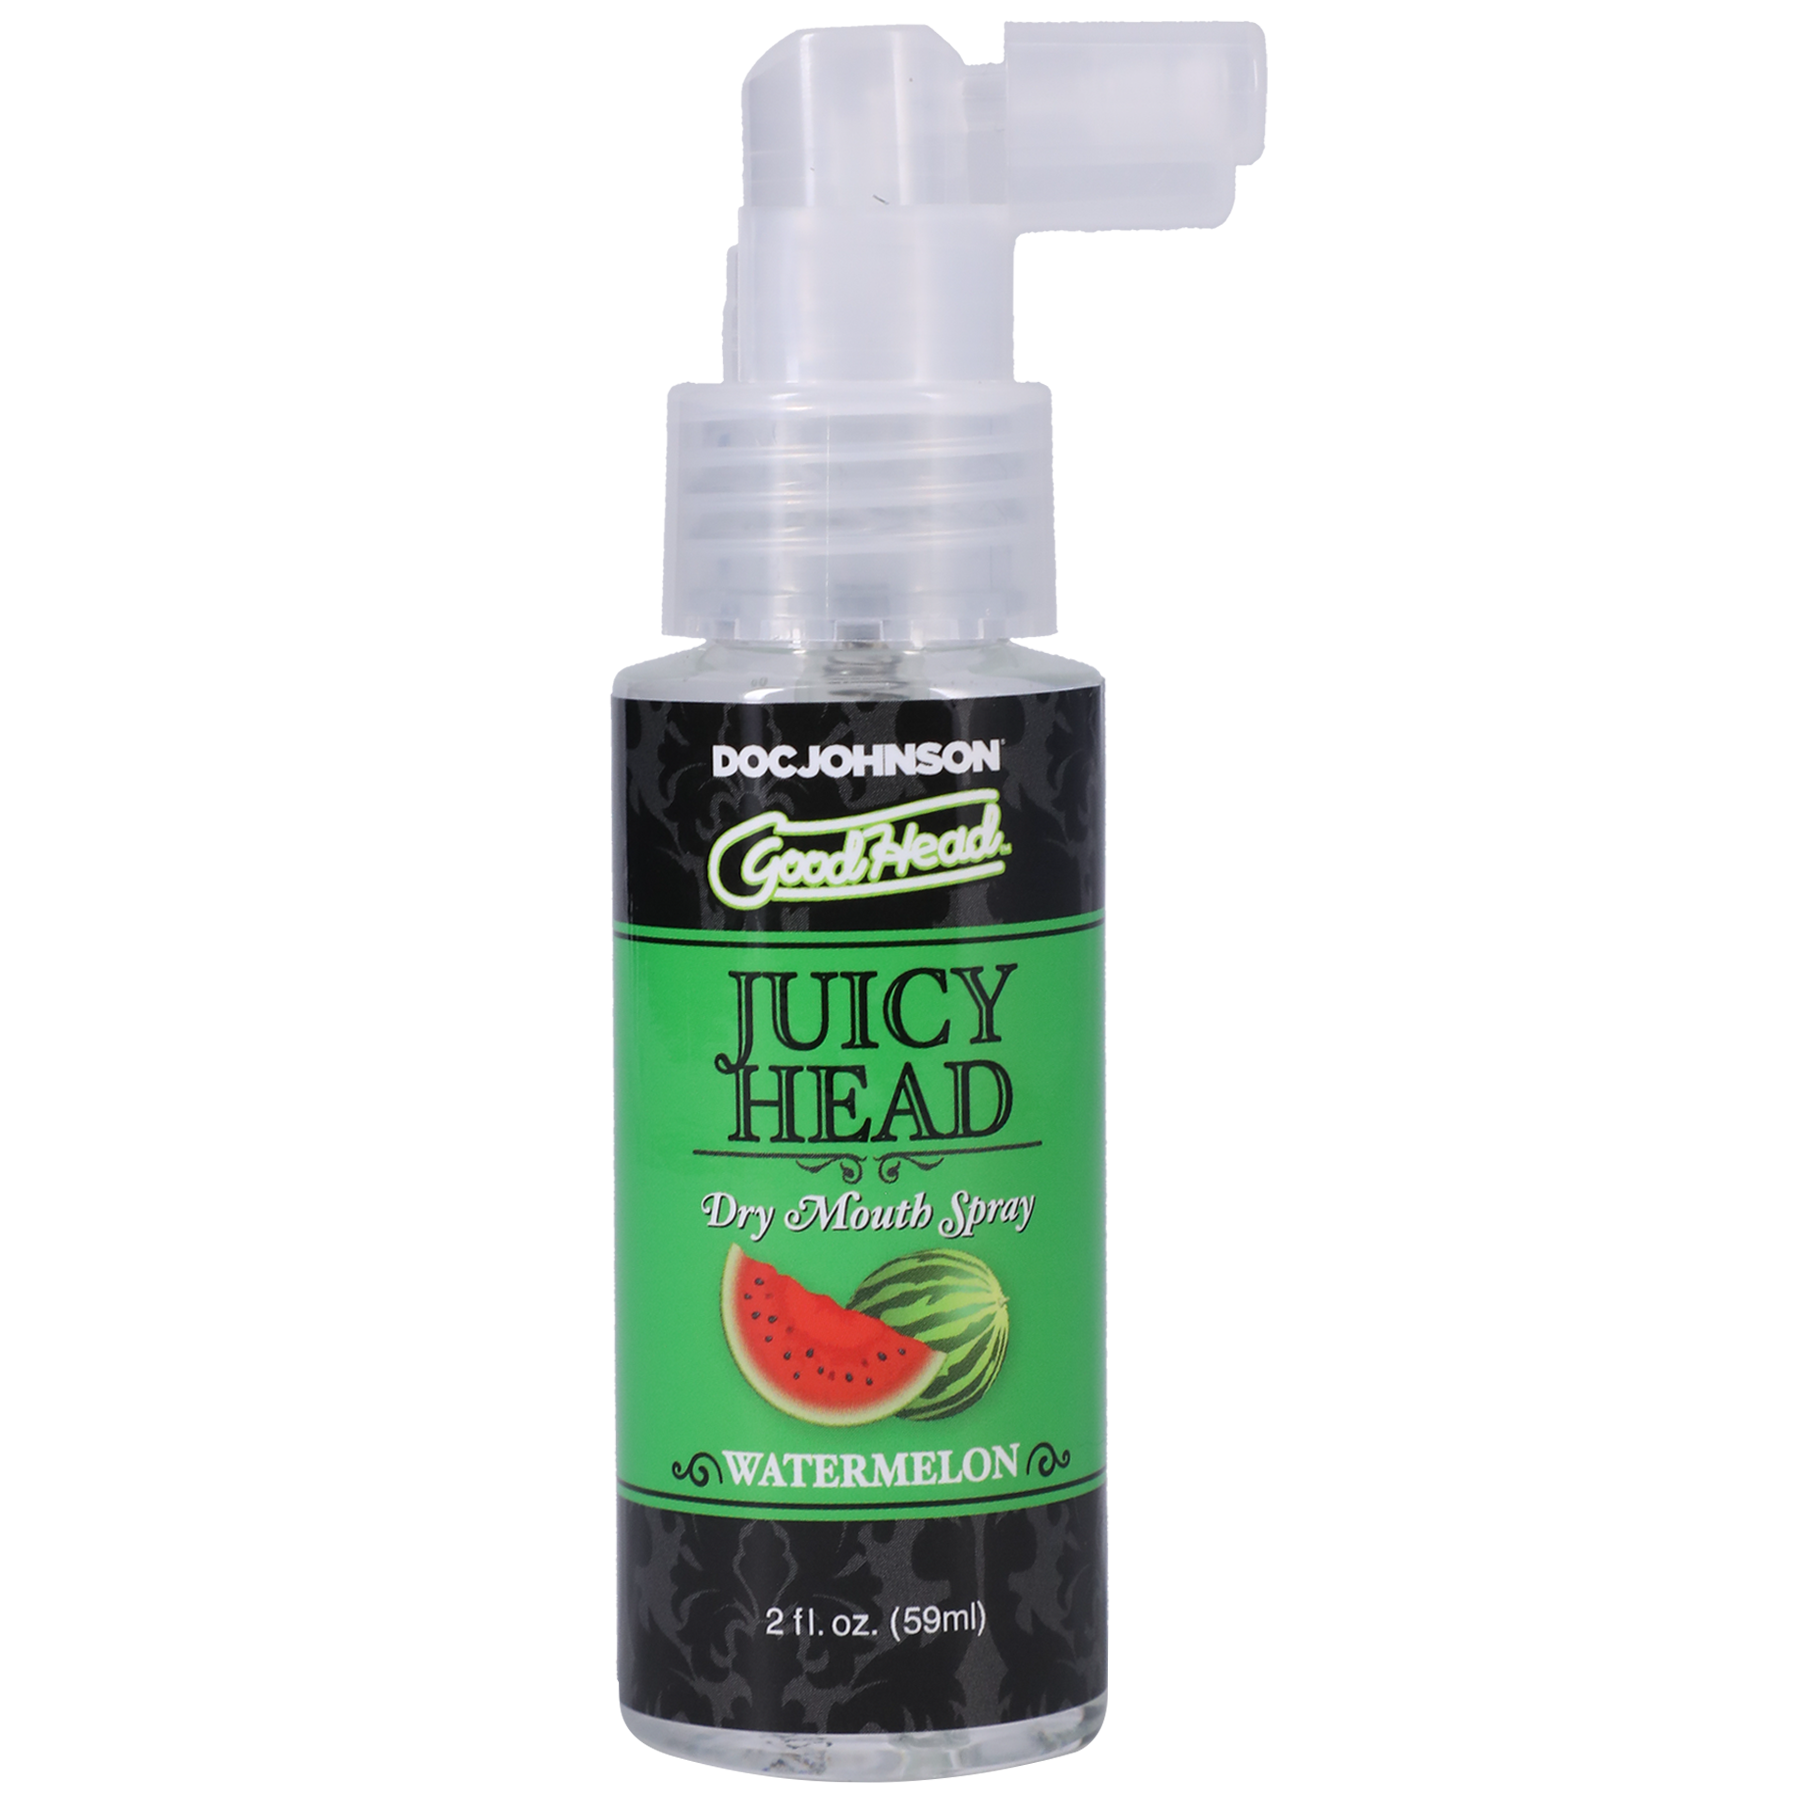 Photo of the bottle of GoodHead Juicy Head from Doc Johson (watermelon) shows its easy to use pump spray nozzle.